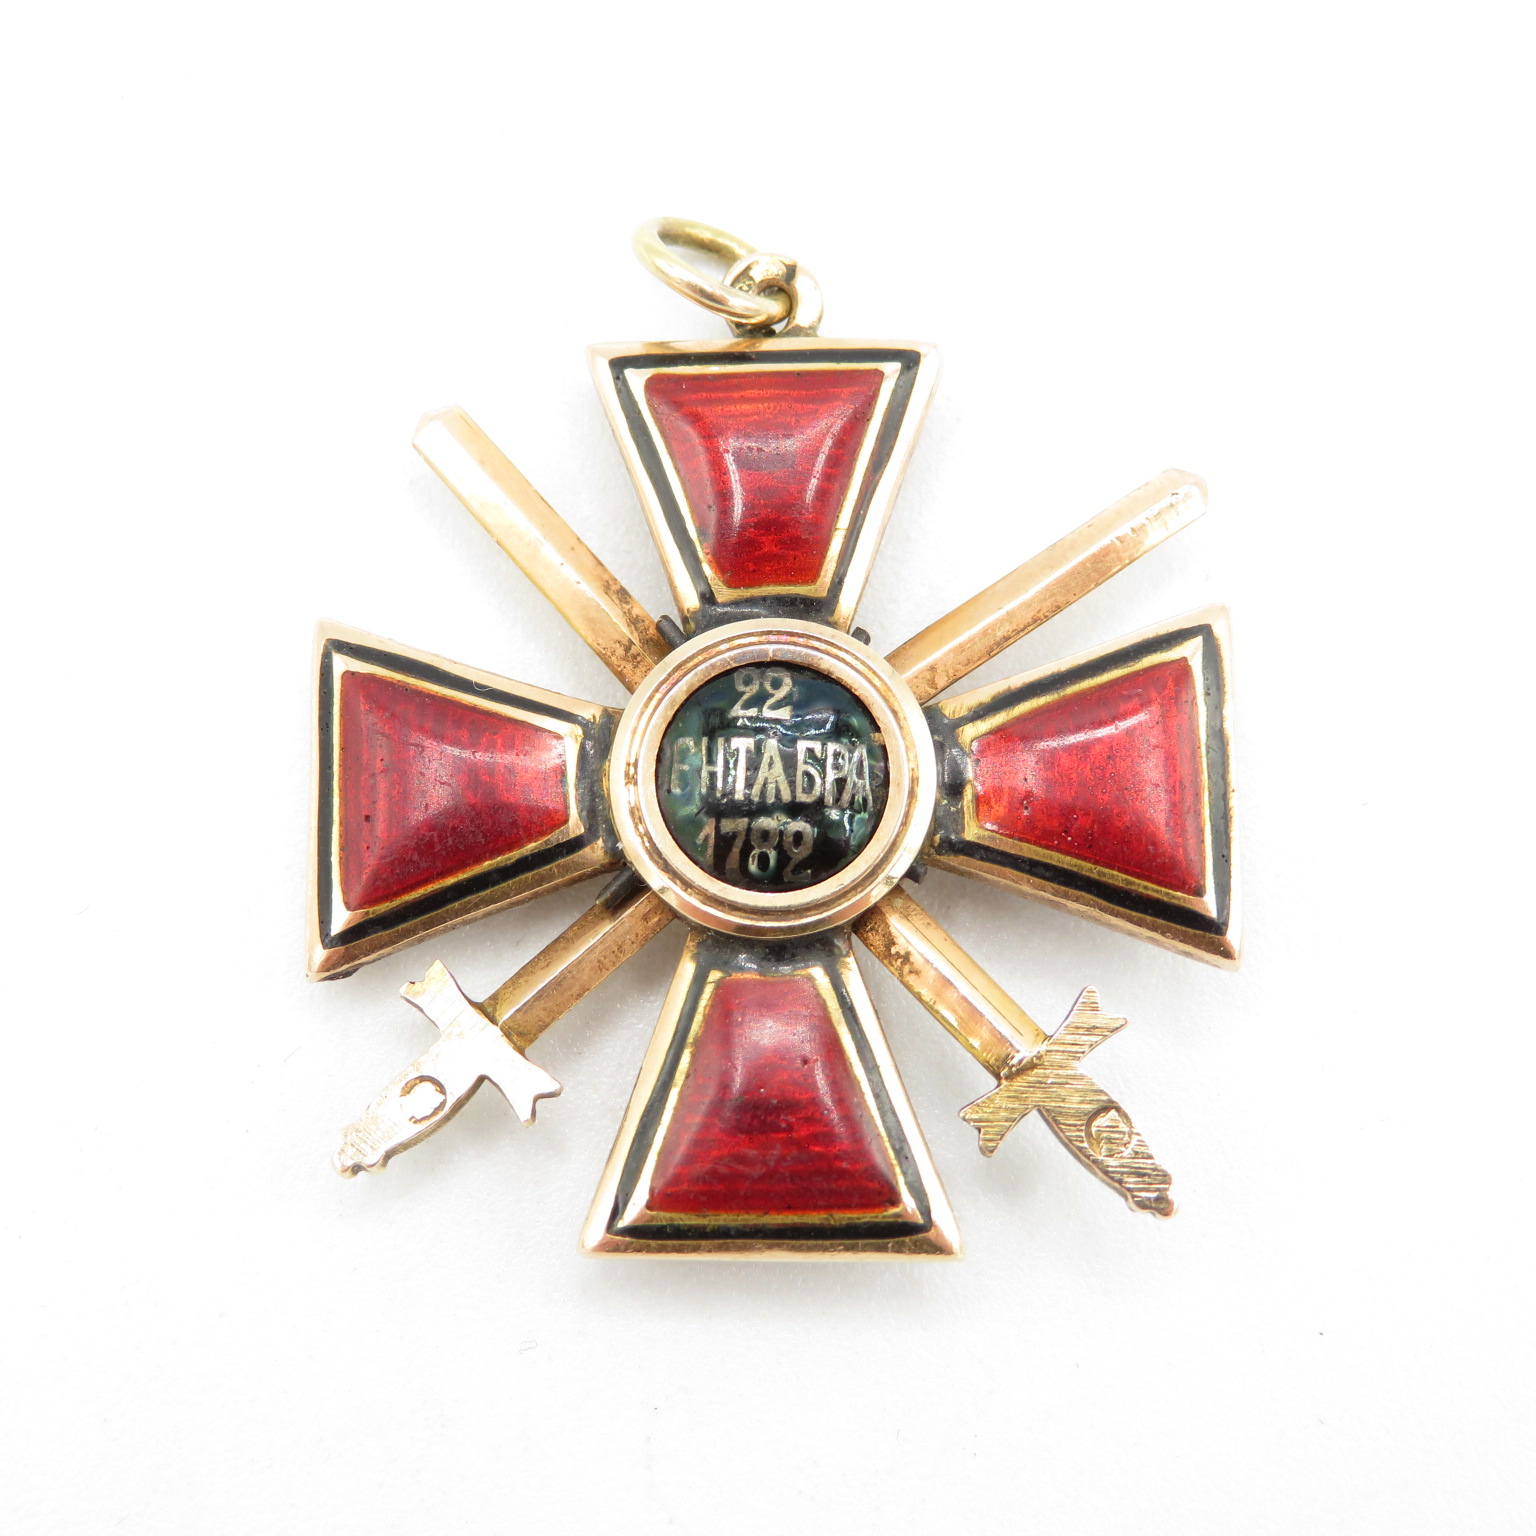 Order of St. Vladimir 18ct gold with red enamel Maltese cross with crossed swords and Royal Cipher - Image 2 of 7